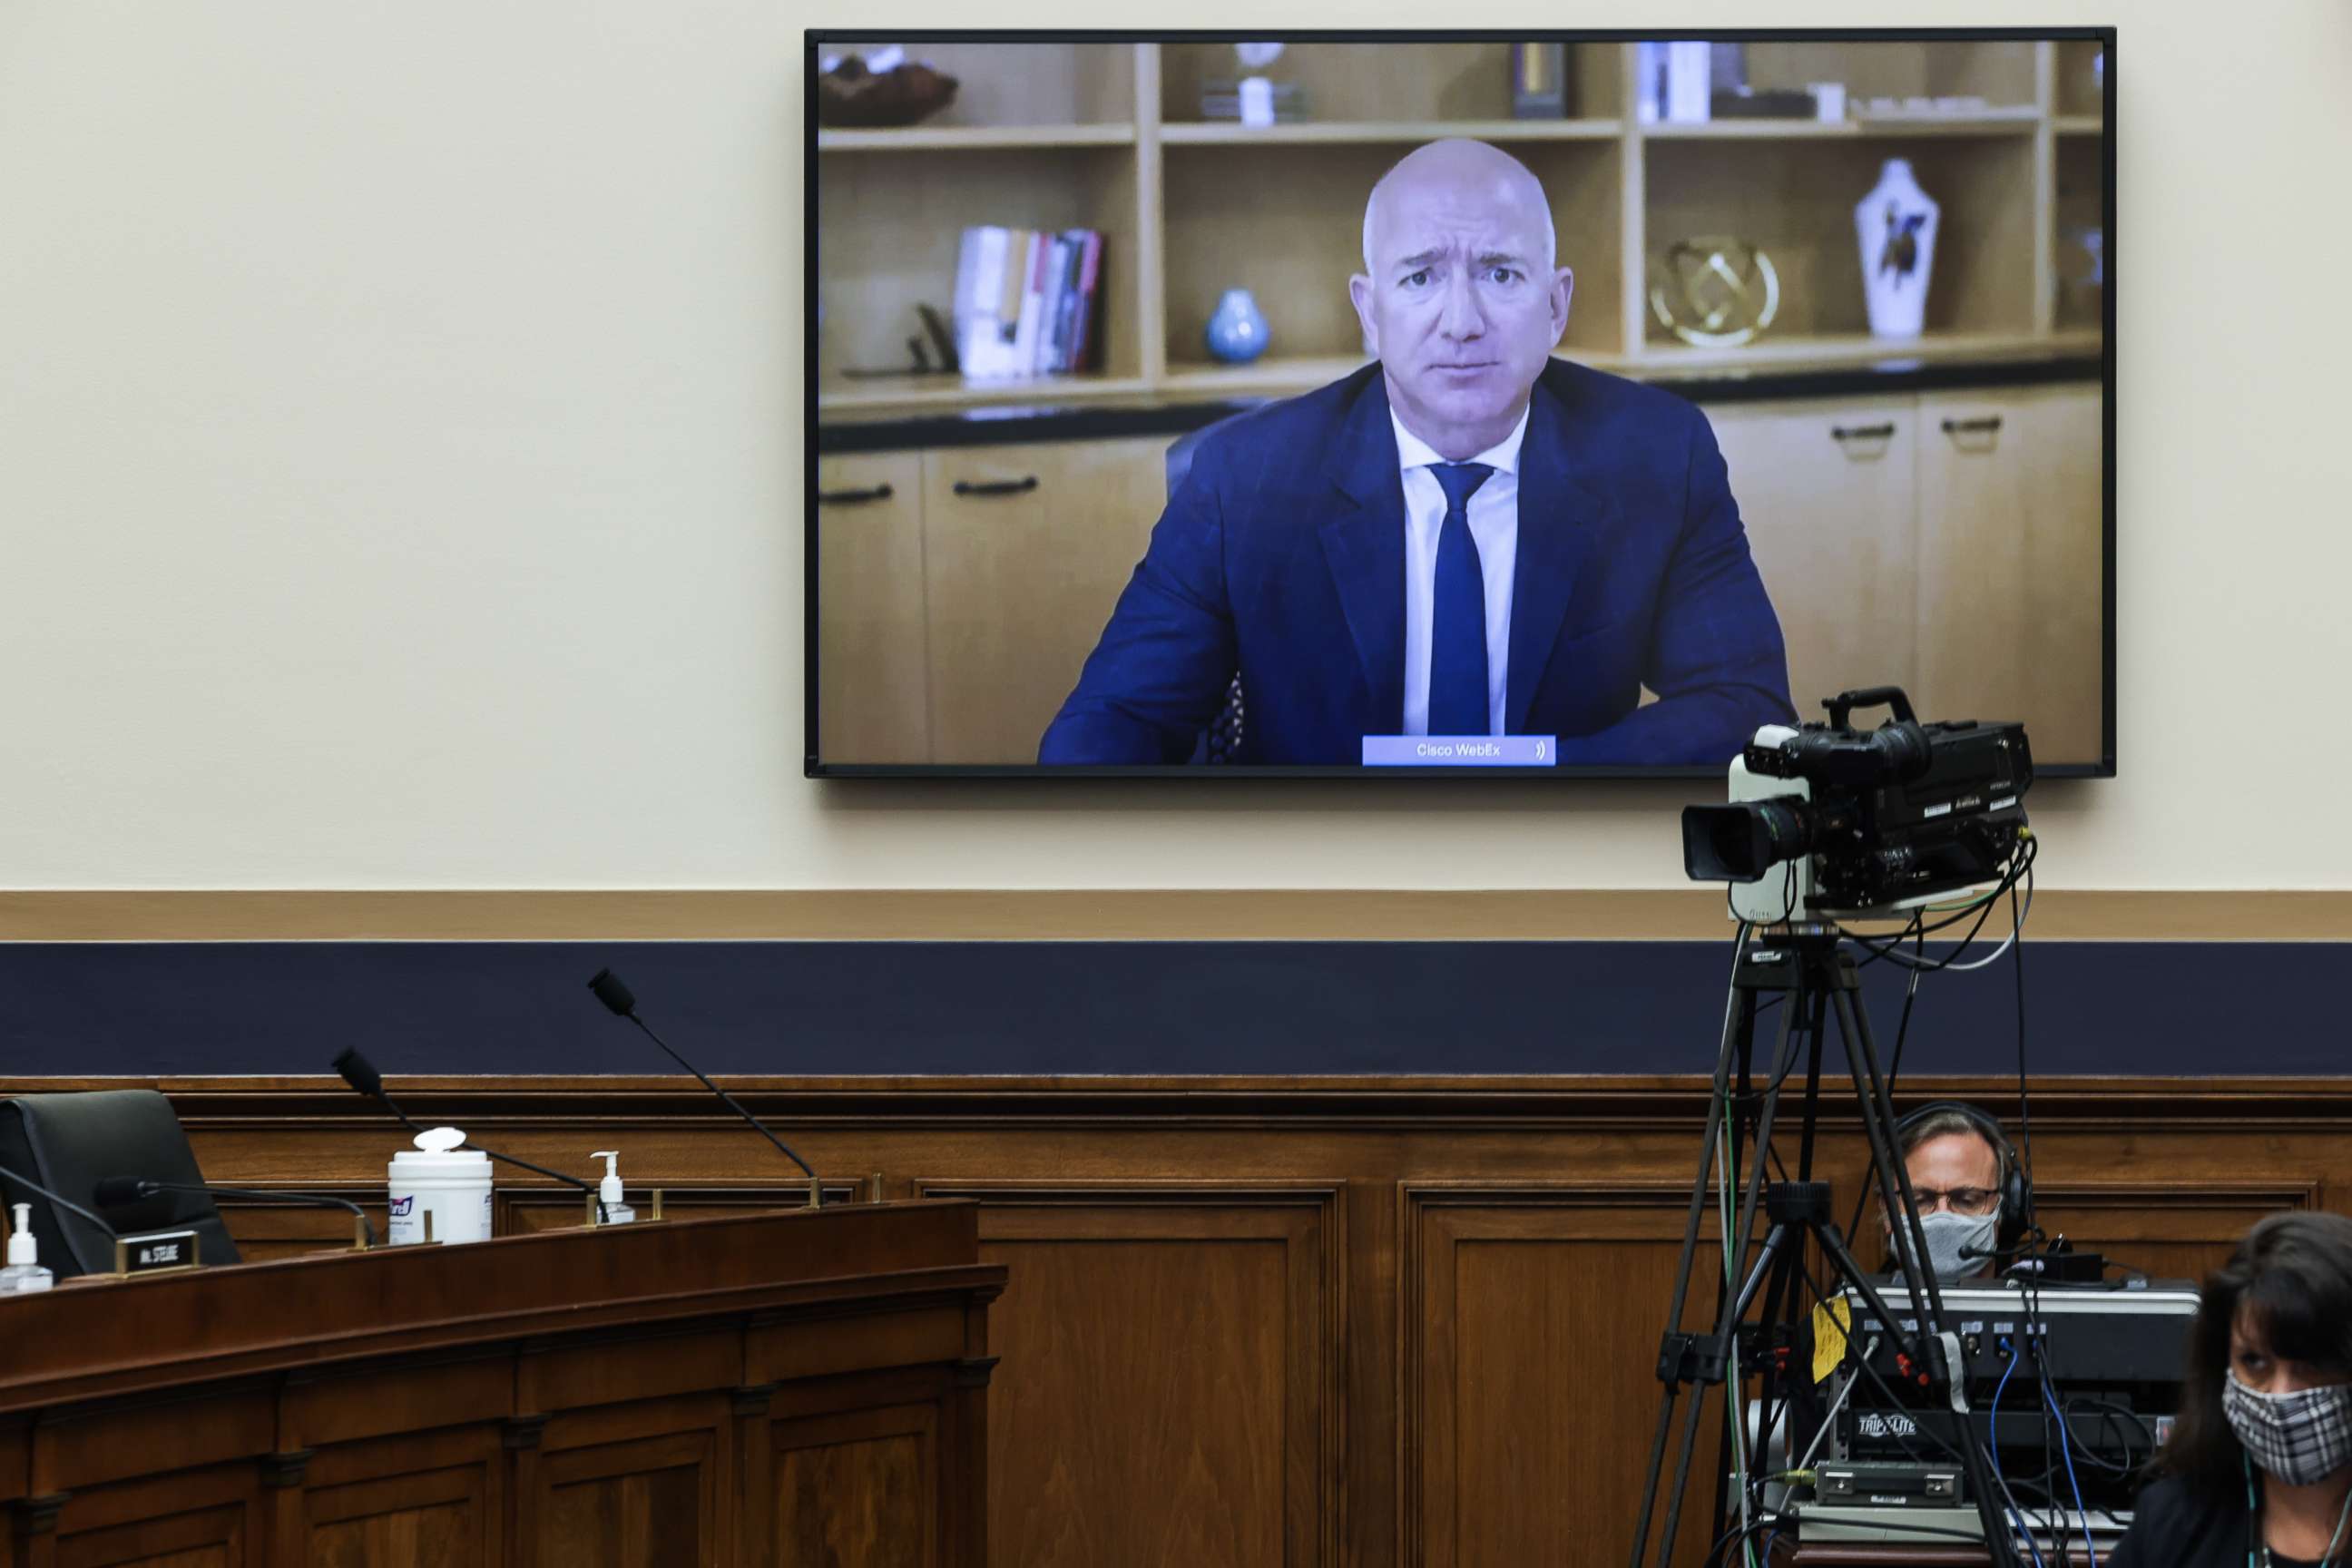 PHOTO: Amazon CEO Jeff Bezos testifies via video conference during a House Judiciary Subcommittee hearing on Online Platforms and Market Power in the Rayburn House office Building, July 29, 2020 on Capitol Hill, in Washington, D.C.